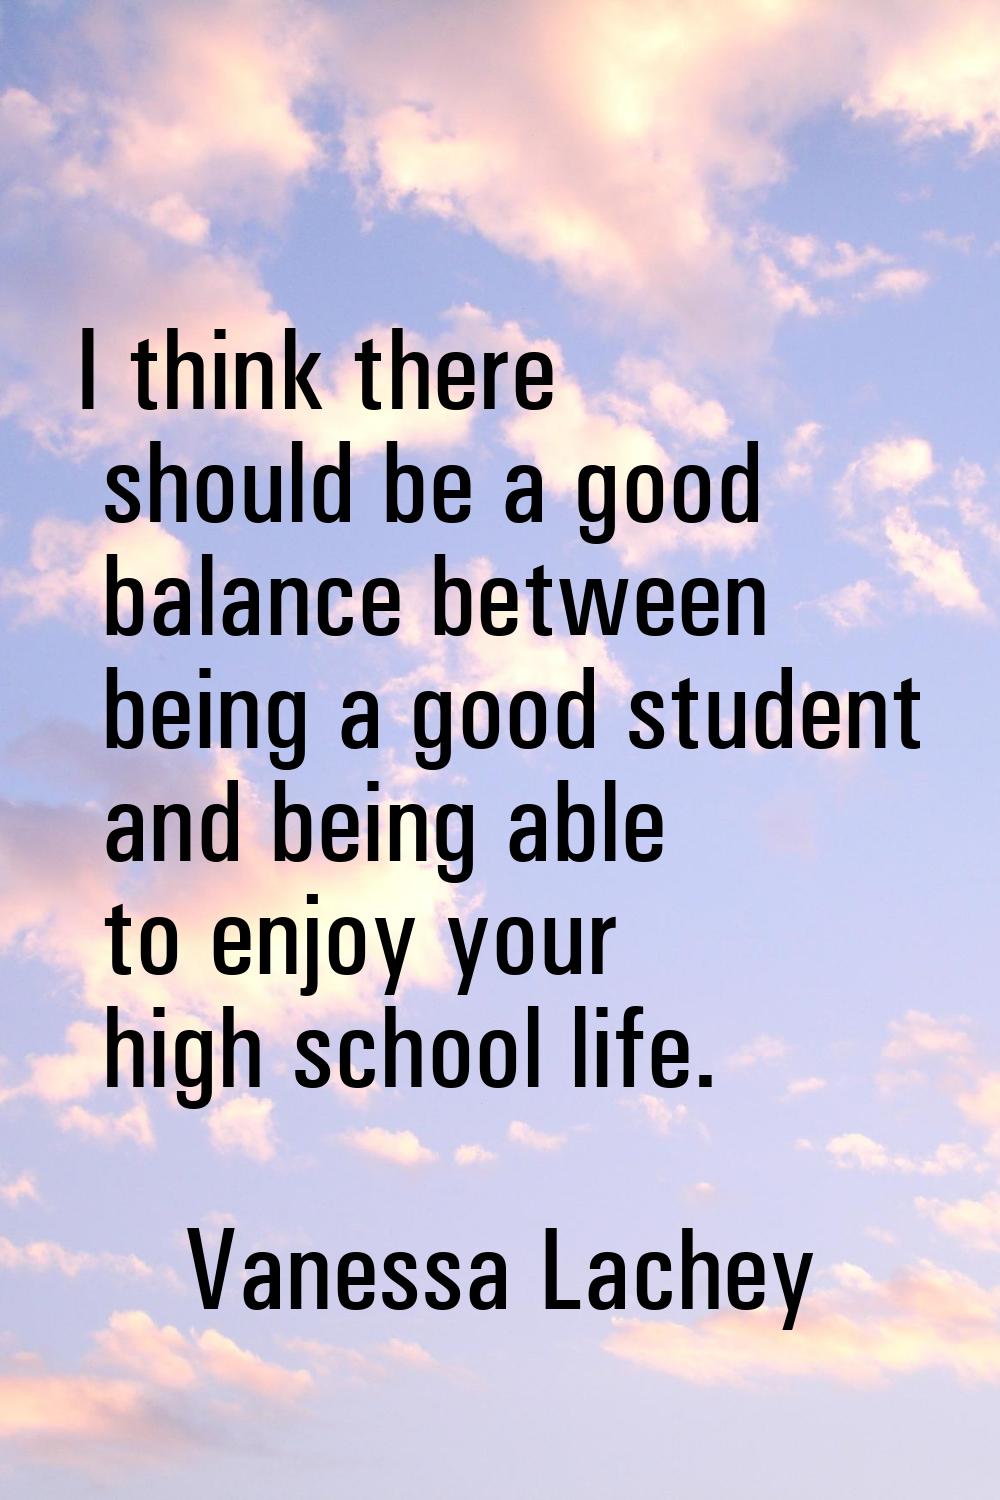 I think there should be a good balance between being a good student and being able to enjoy your hi